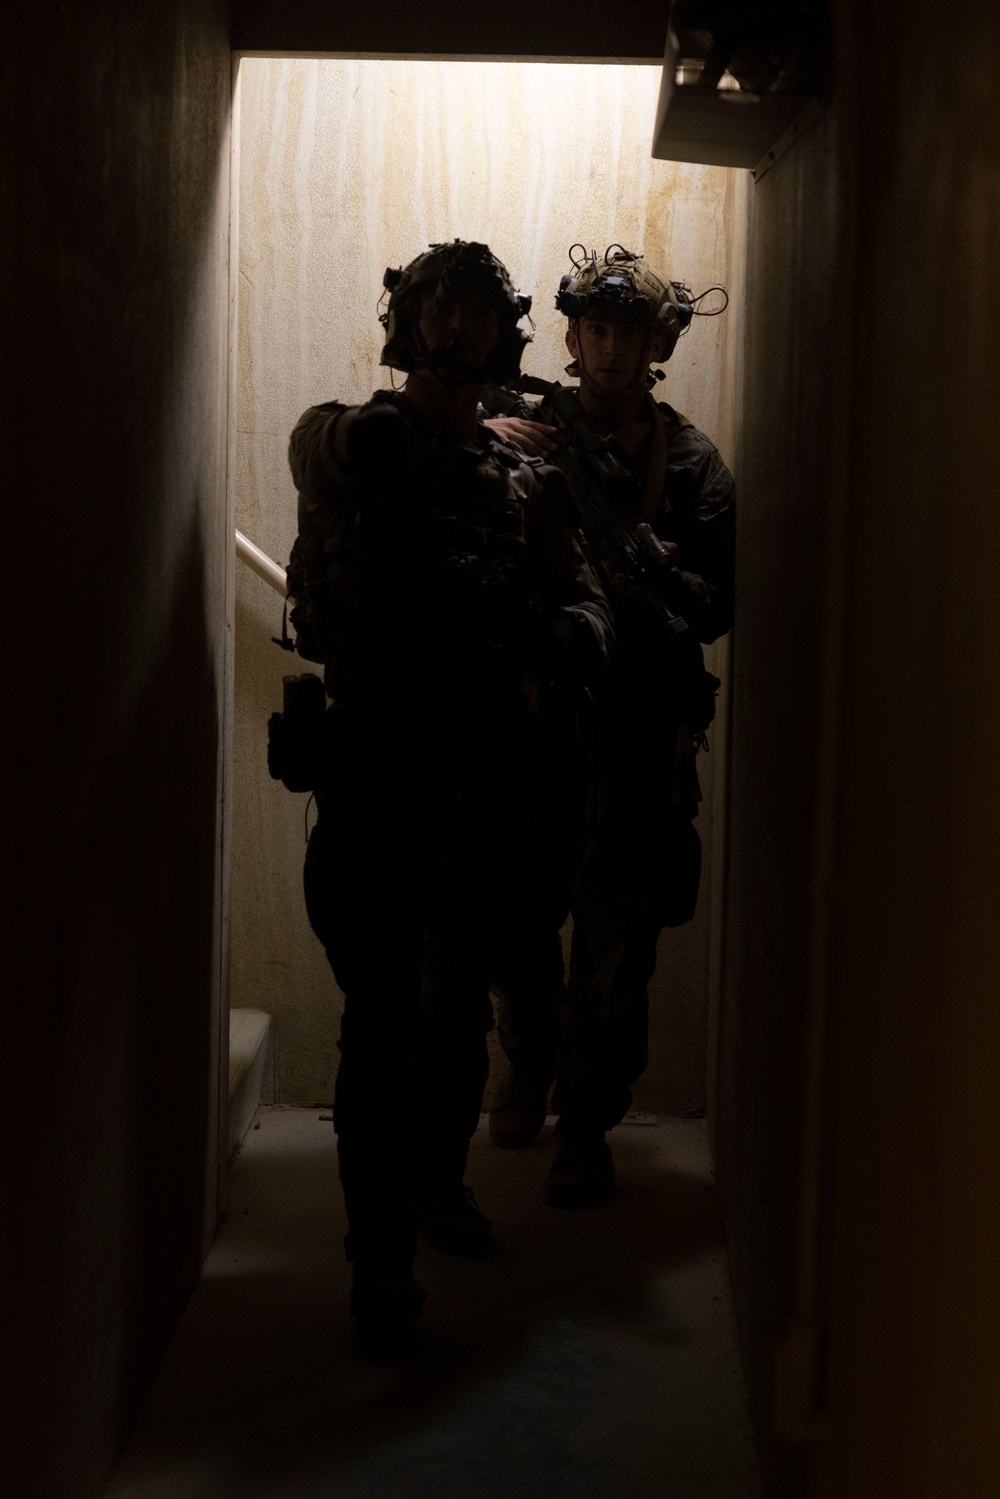 MARSOC conducts small unit tactics training with 1/8